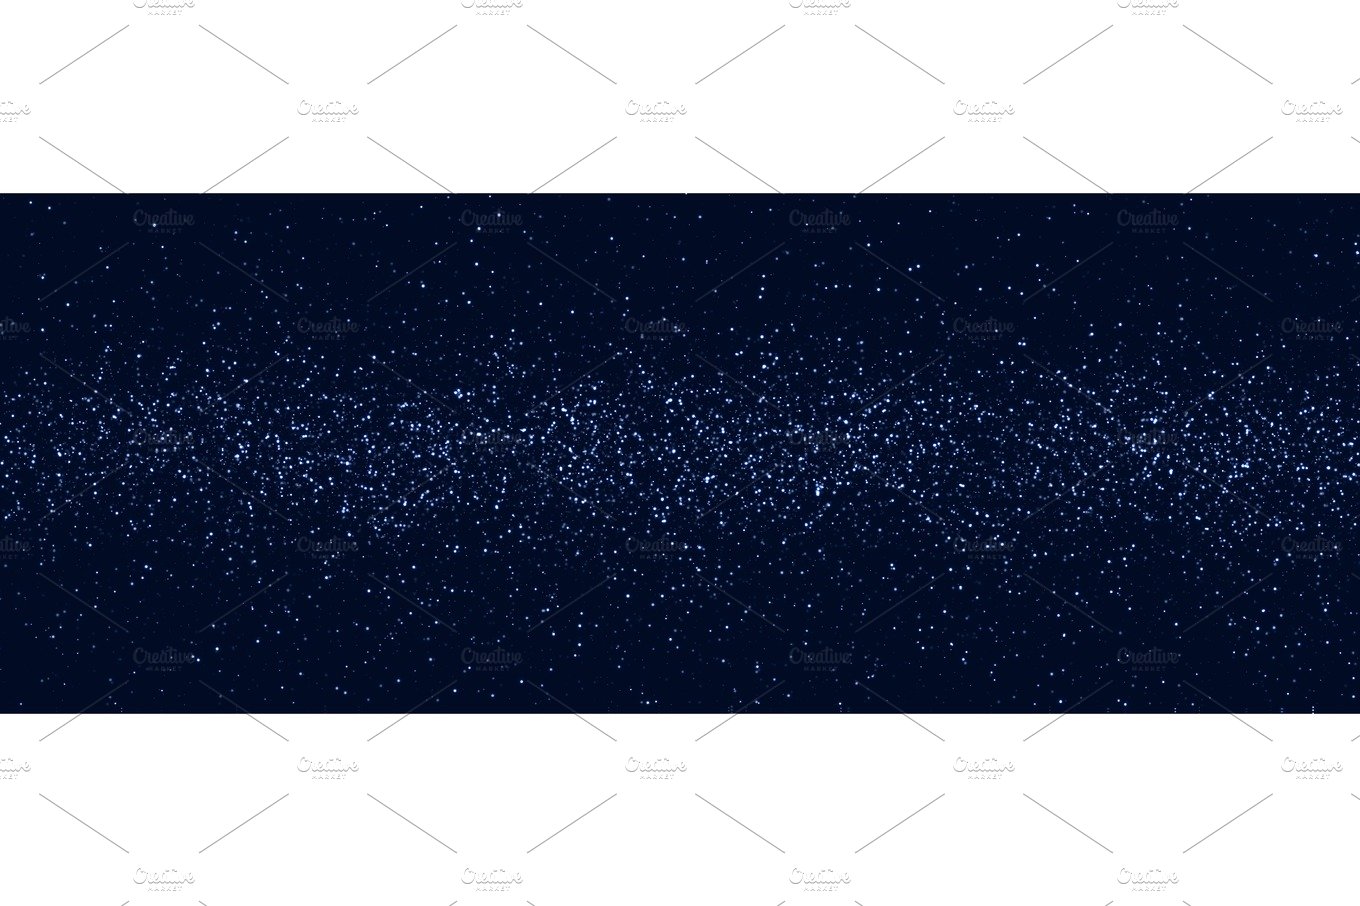 Space stars background. Light night sky vector cover image.